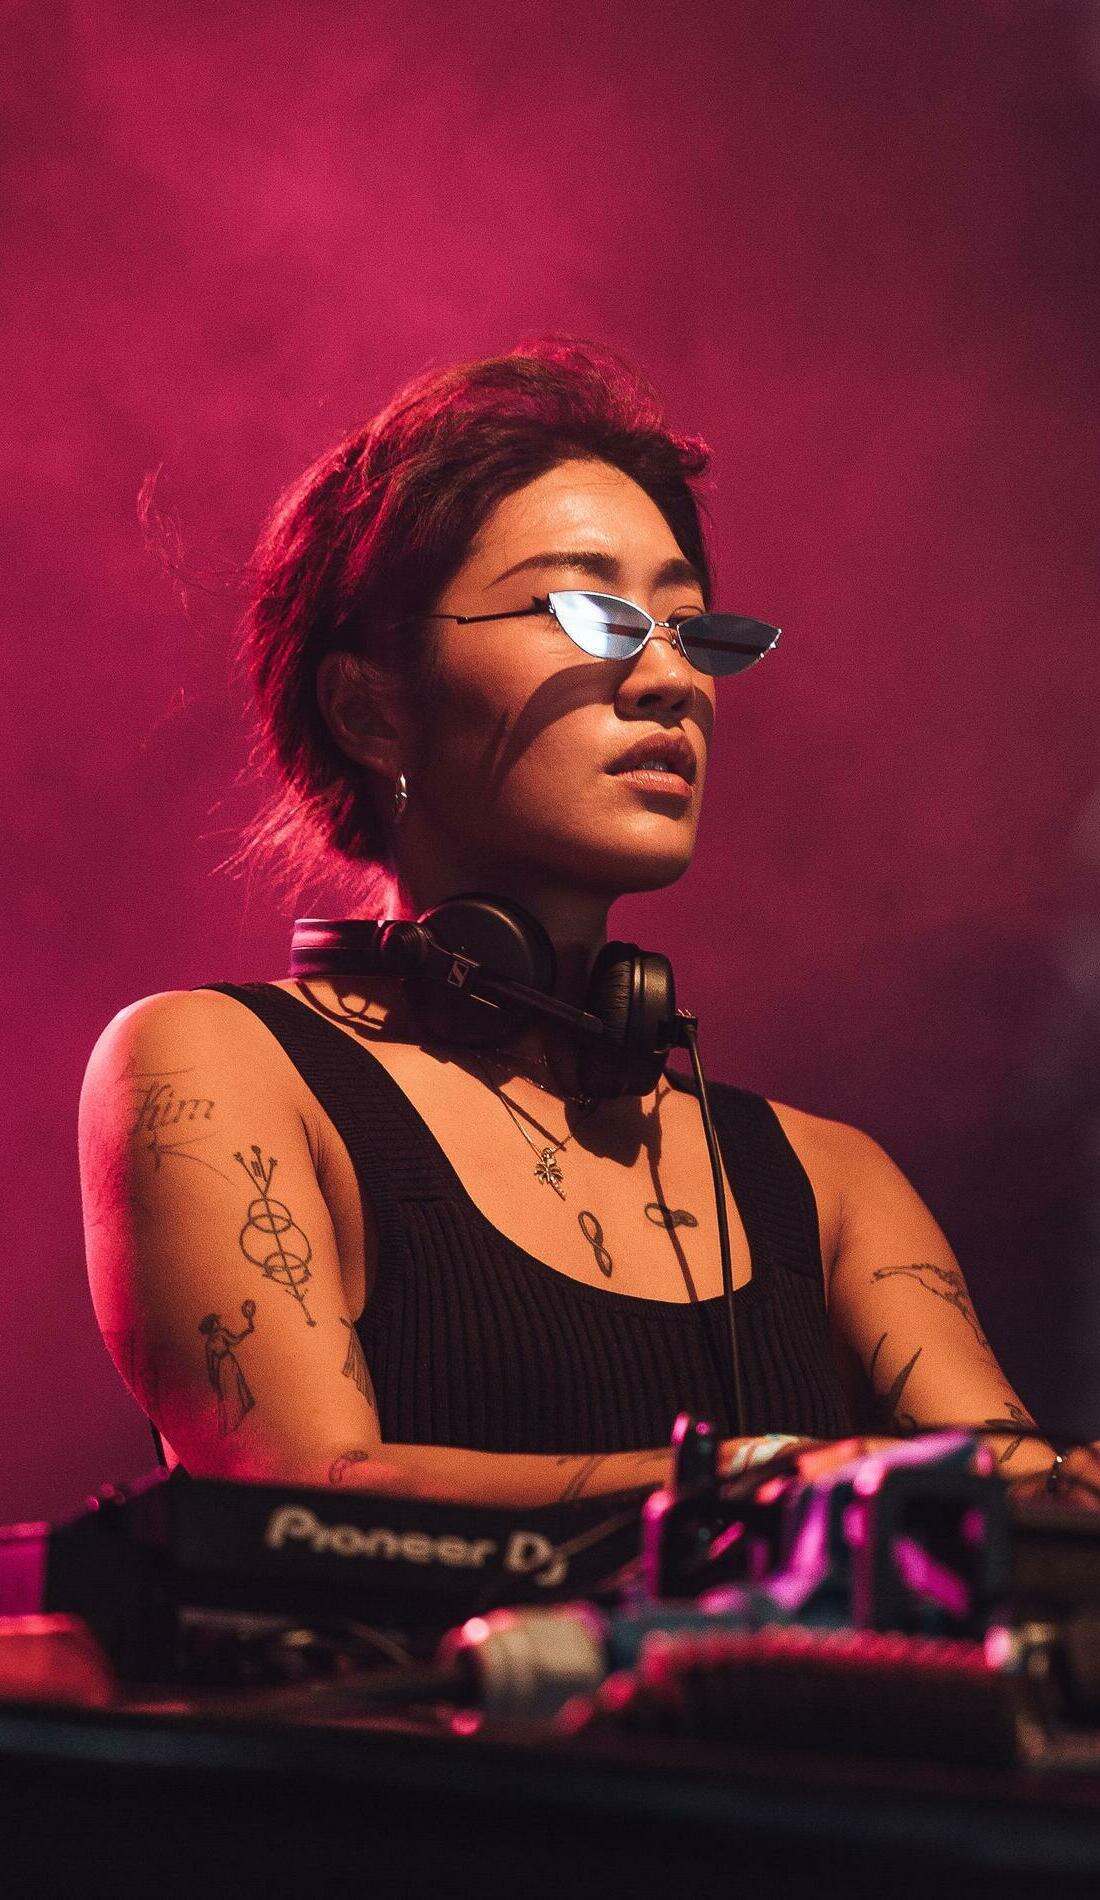 Peggy Gou - Songs, Events and Music Stats